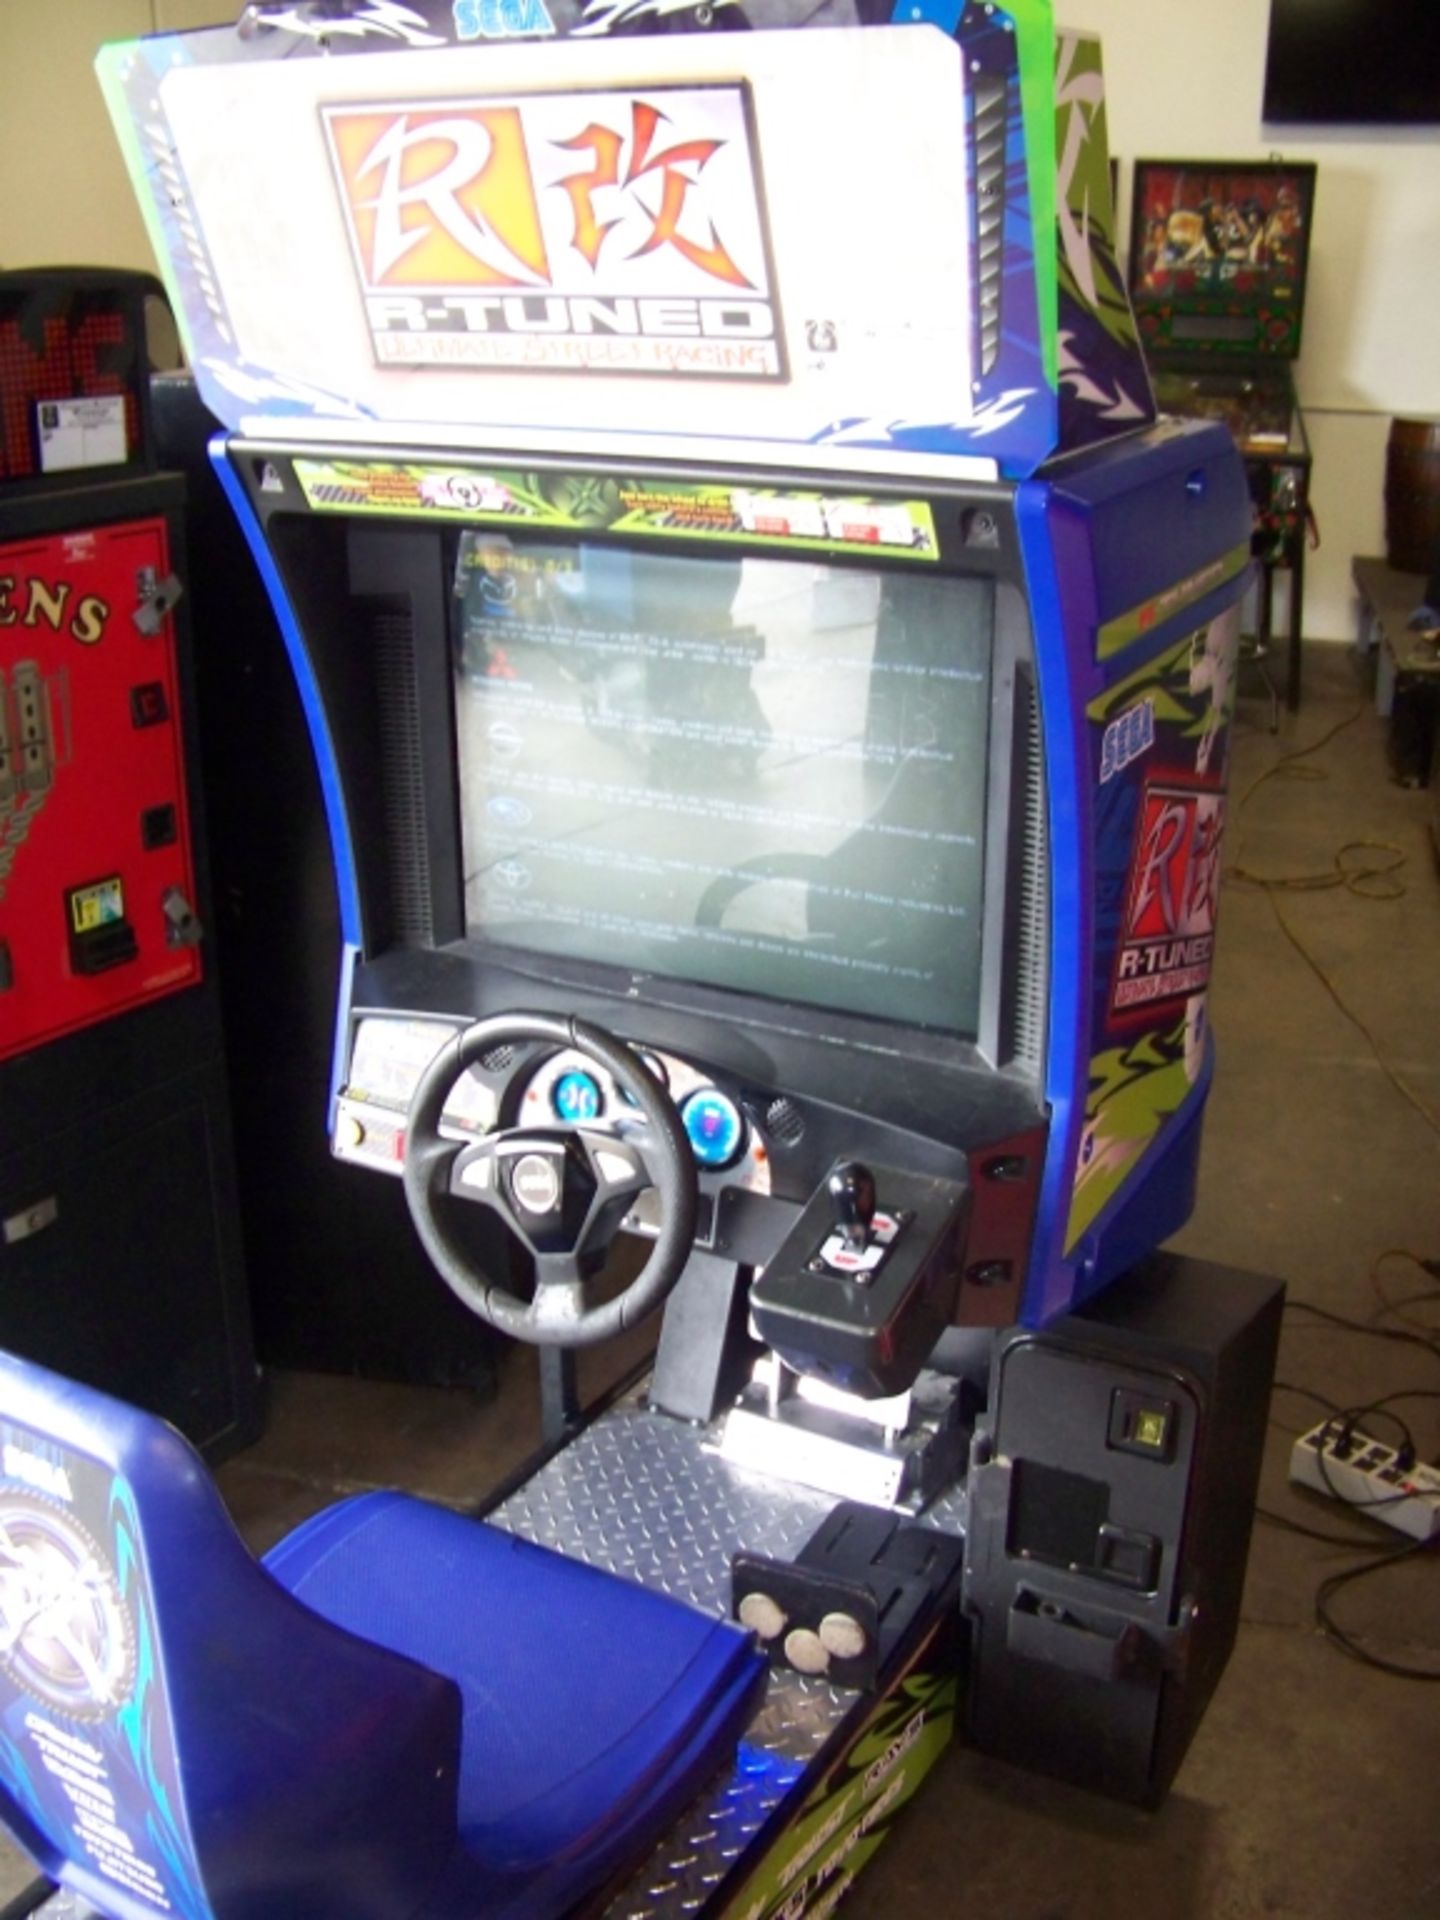 R-TUNED STREET RACING ARCADE GAME SEGA Item is in used condition. Evidence of wear and commercial - Image 2 of 5